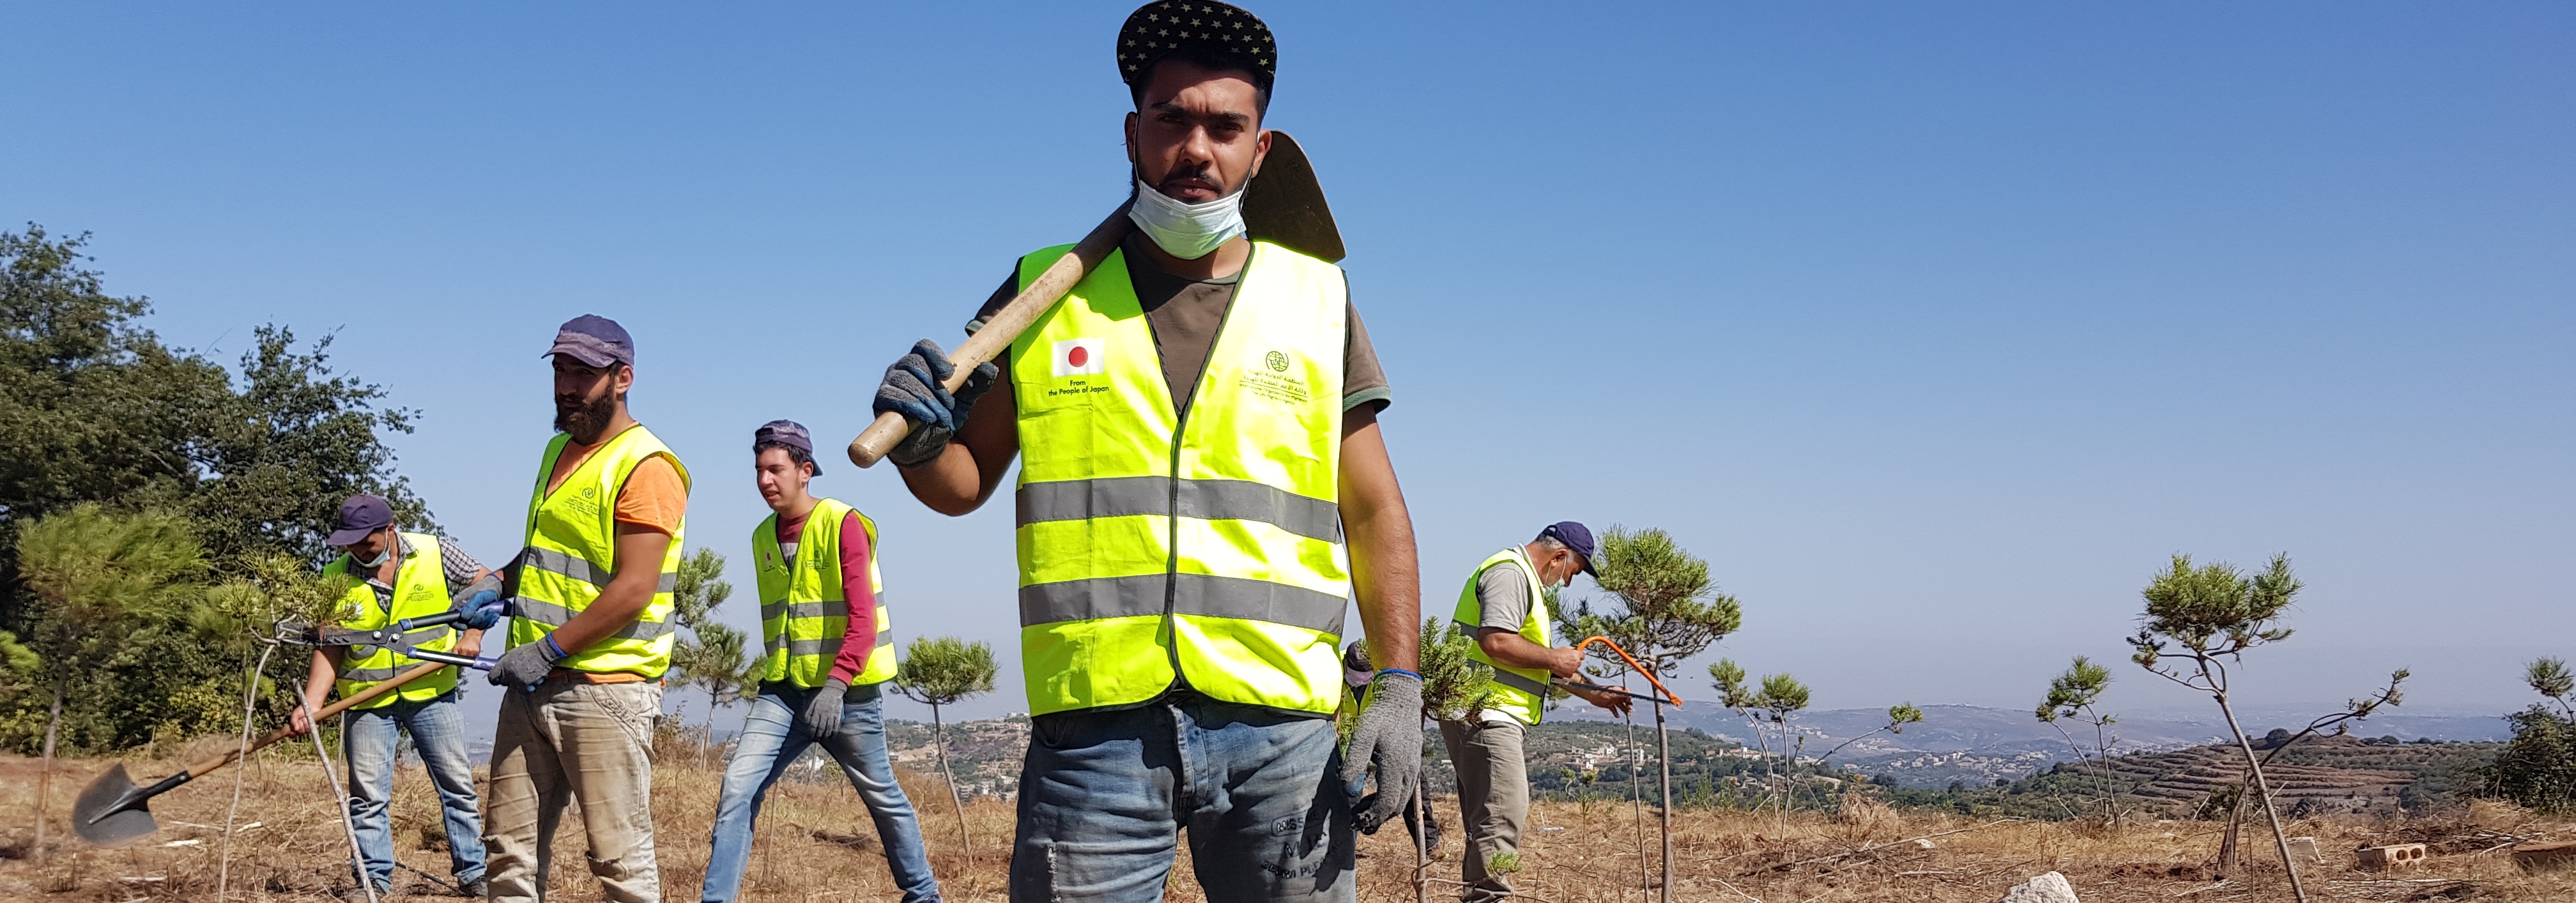 Beneficiaries carry out public gardening and tree-trimming in Hrar village, Akkar. @ IOM Lebanon, 2021